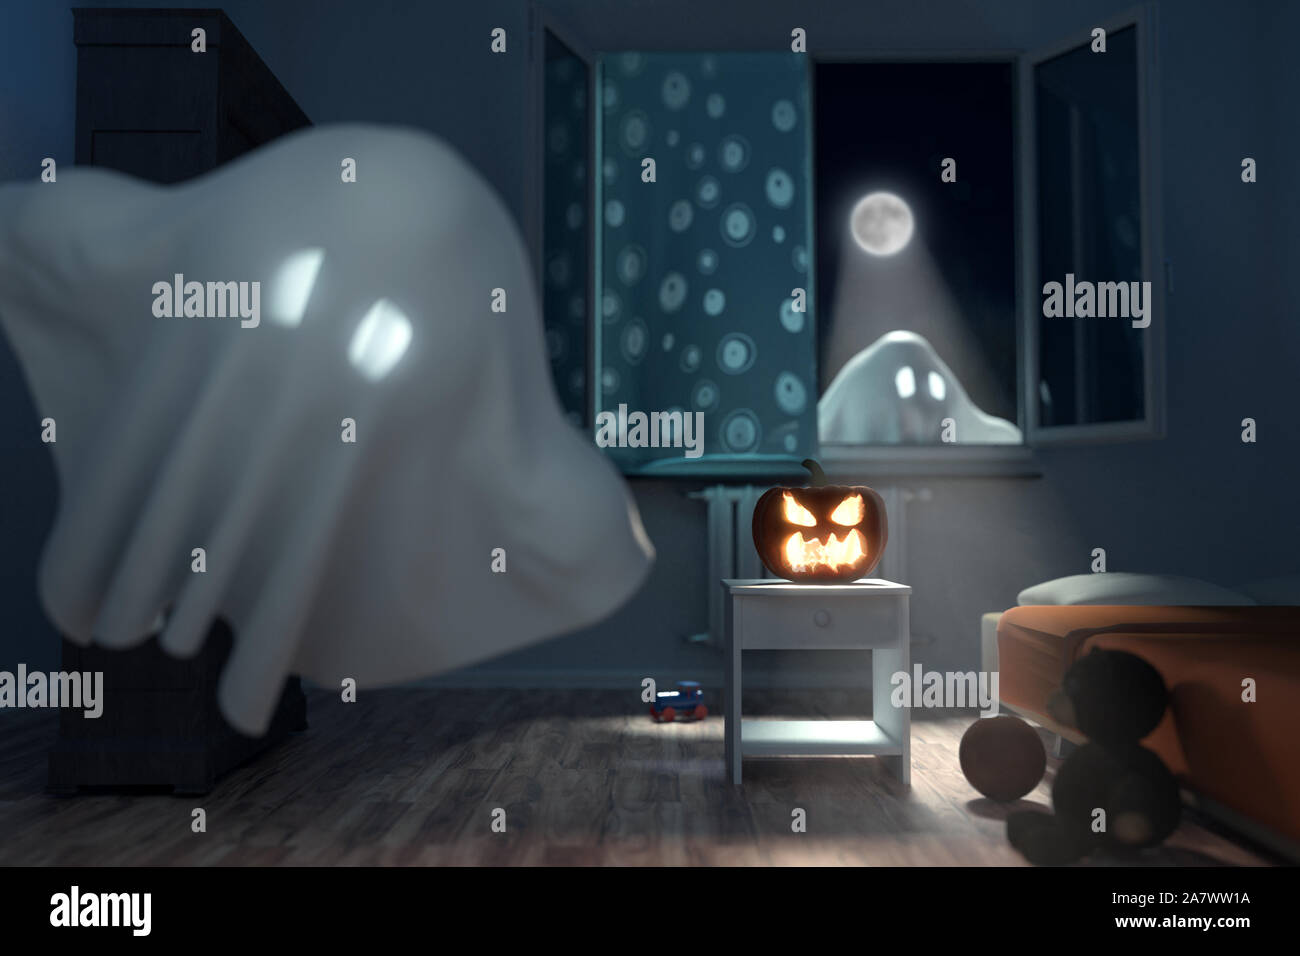 3d rendering of children's room at night with flying ghosts and lighten jack o' lantern. Concept Halloween Stock Photo